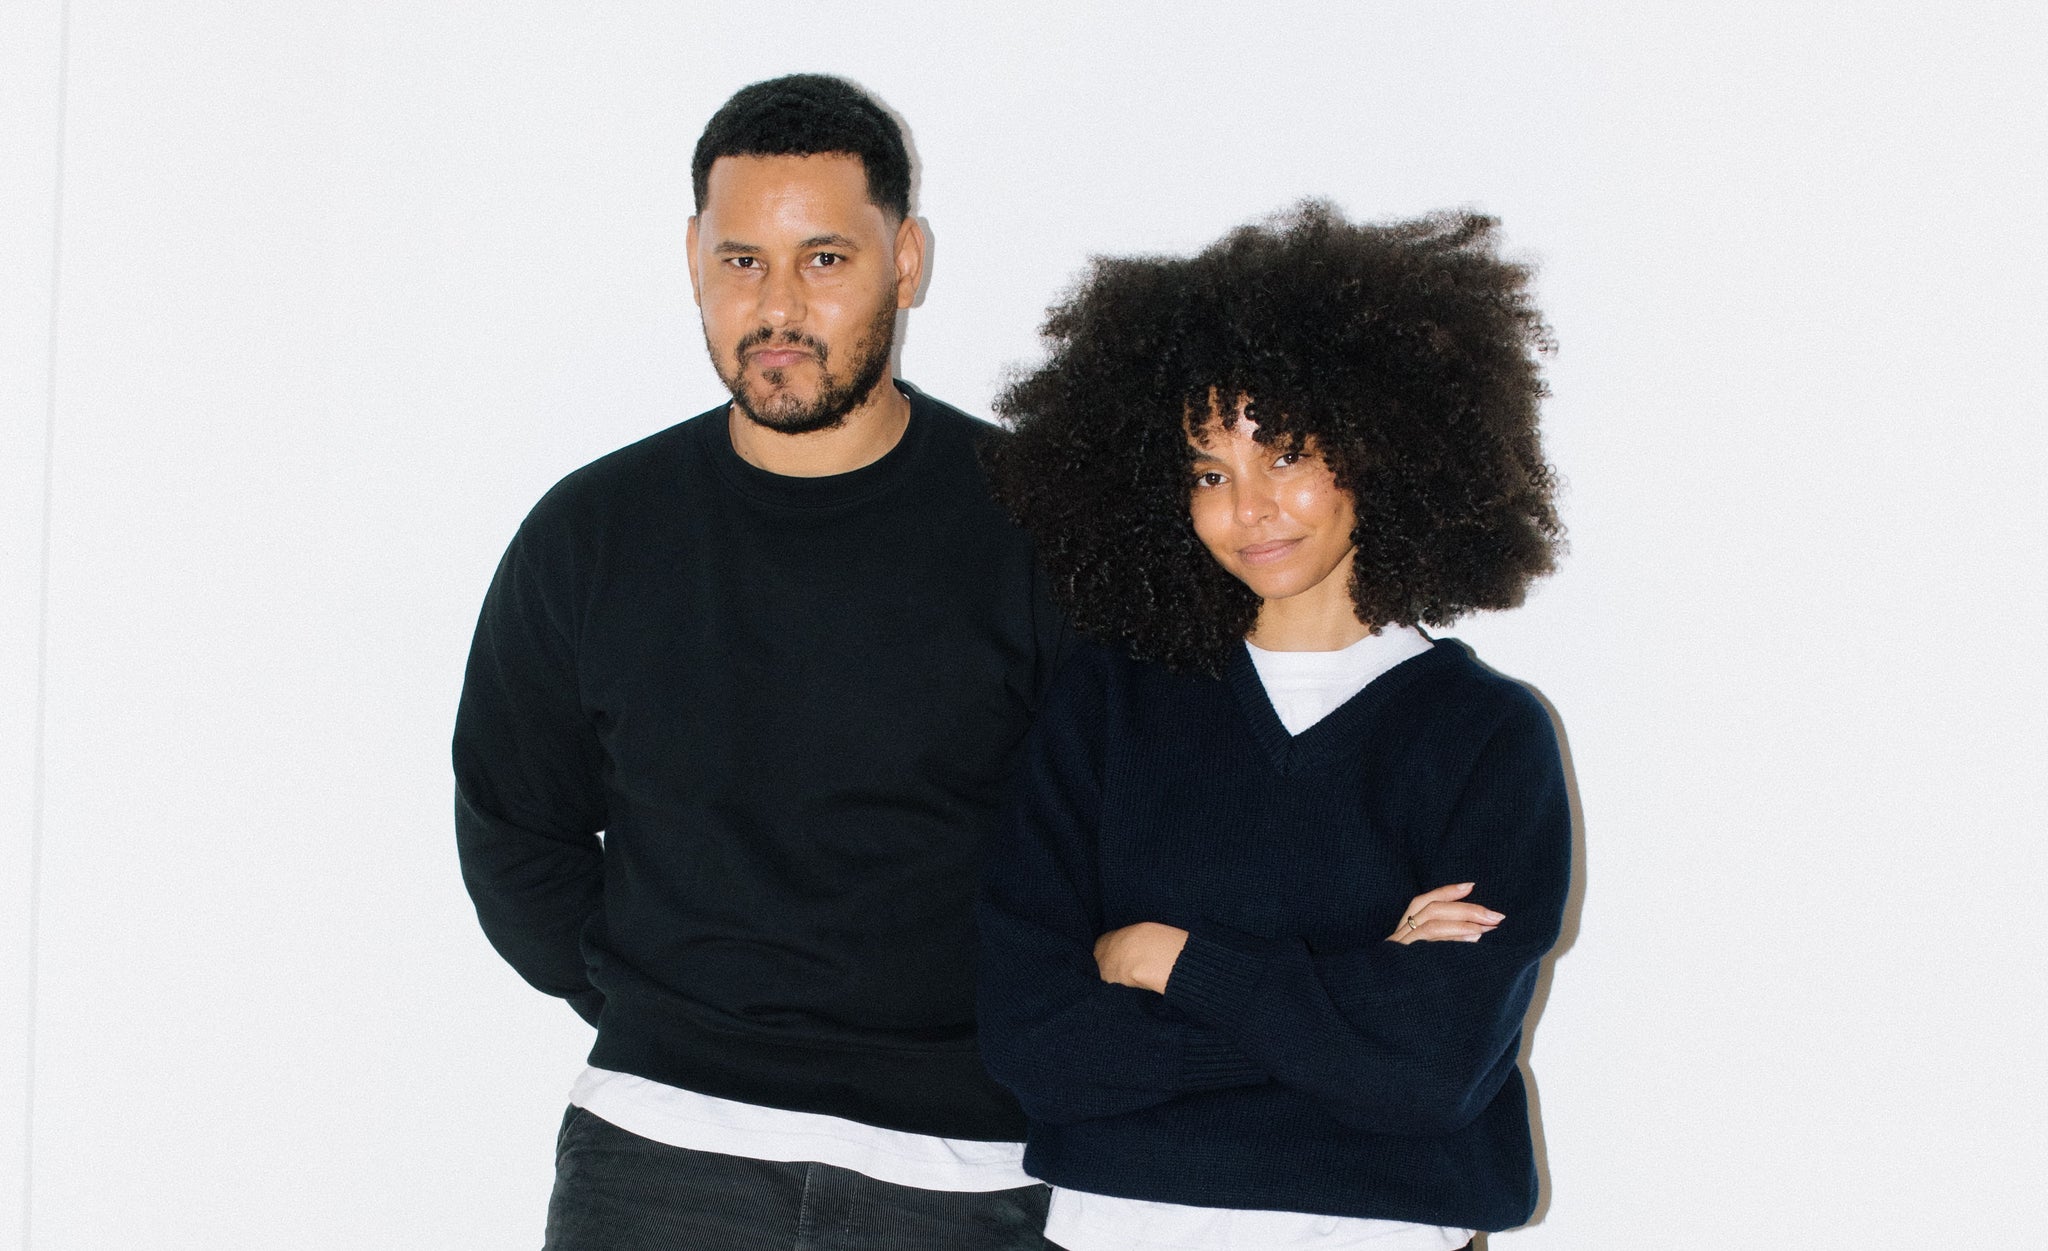 Dwayne Vatcher and Brittney Mackinnon, founders of Body of Work, a design studio specializing in elevated, unisex basics